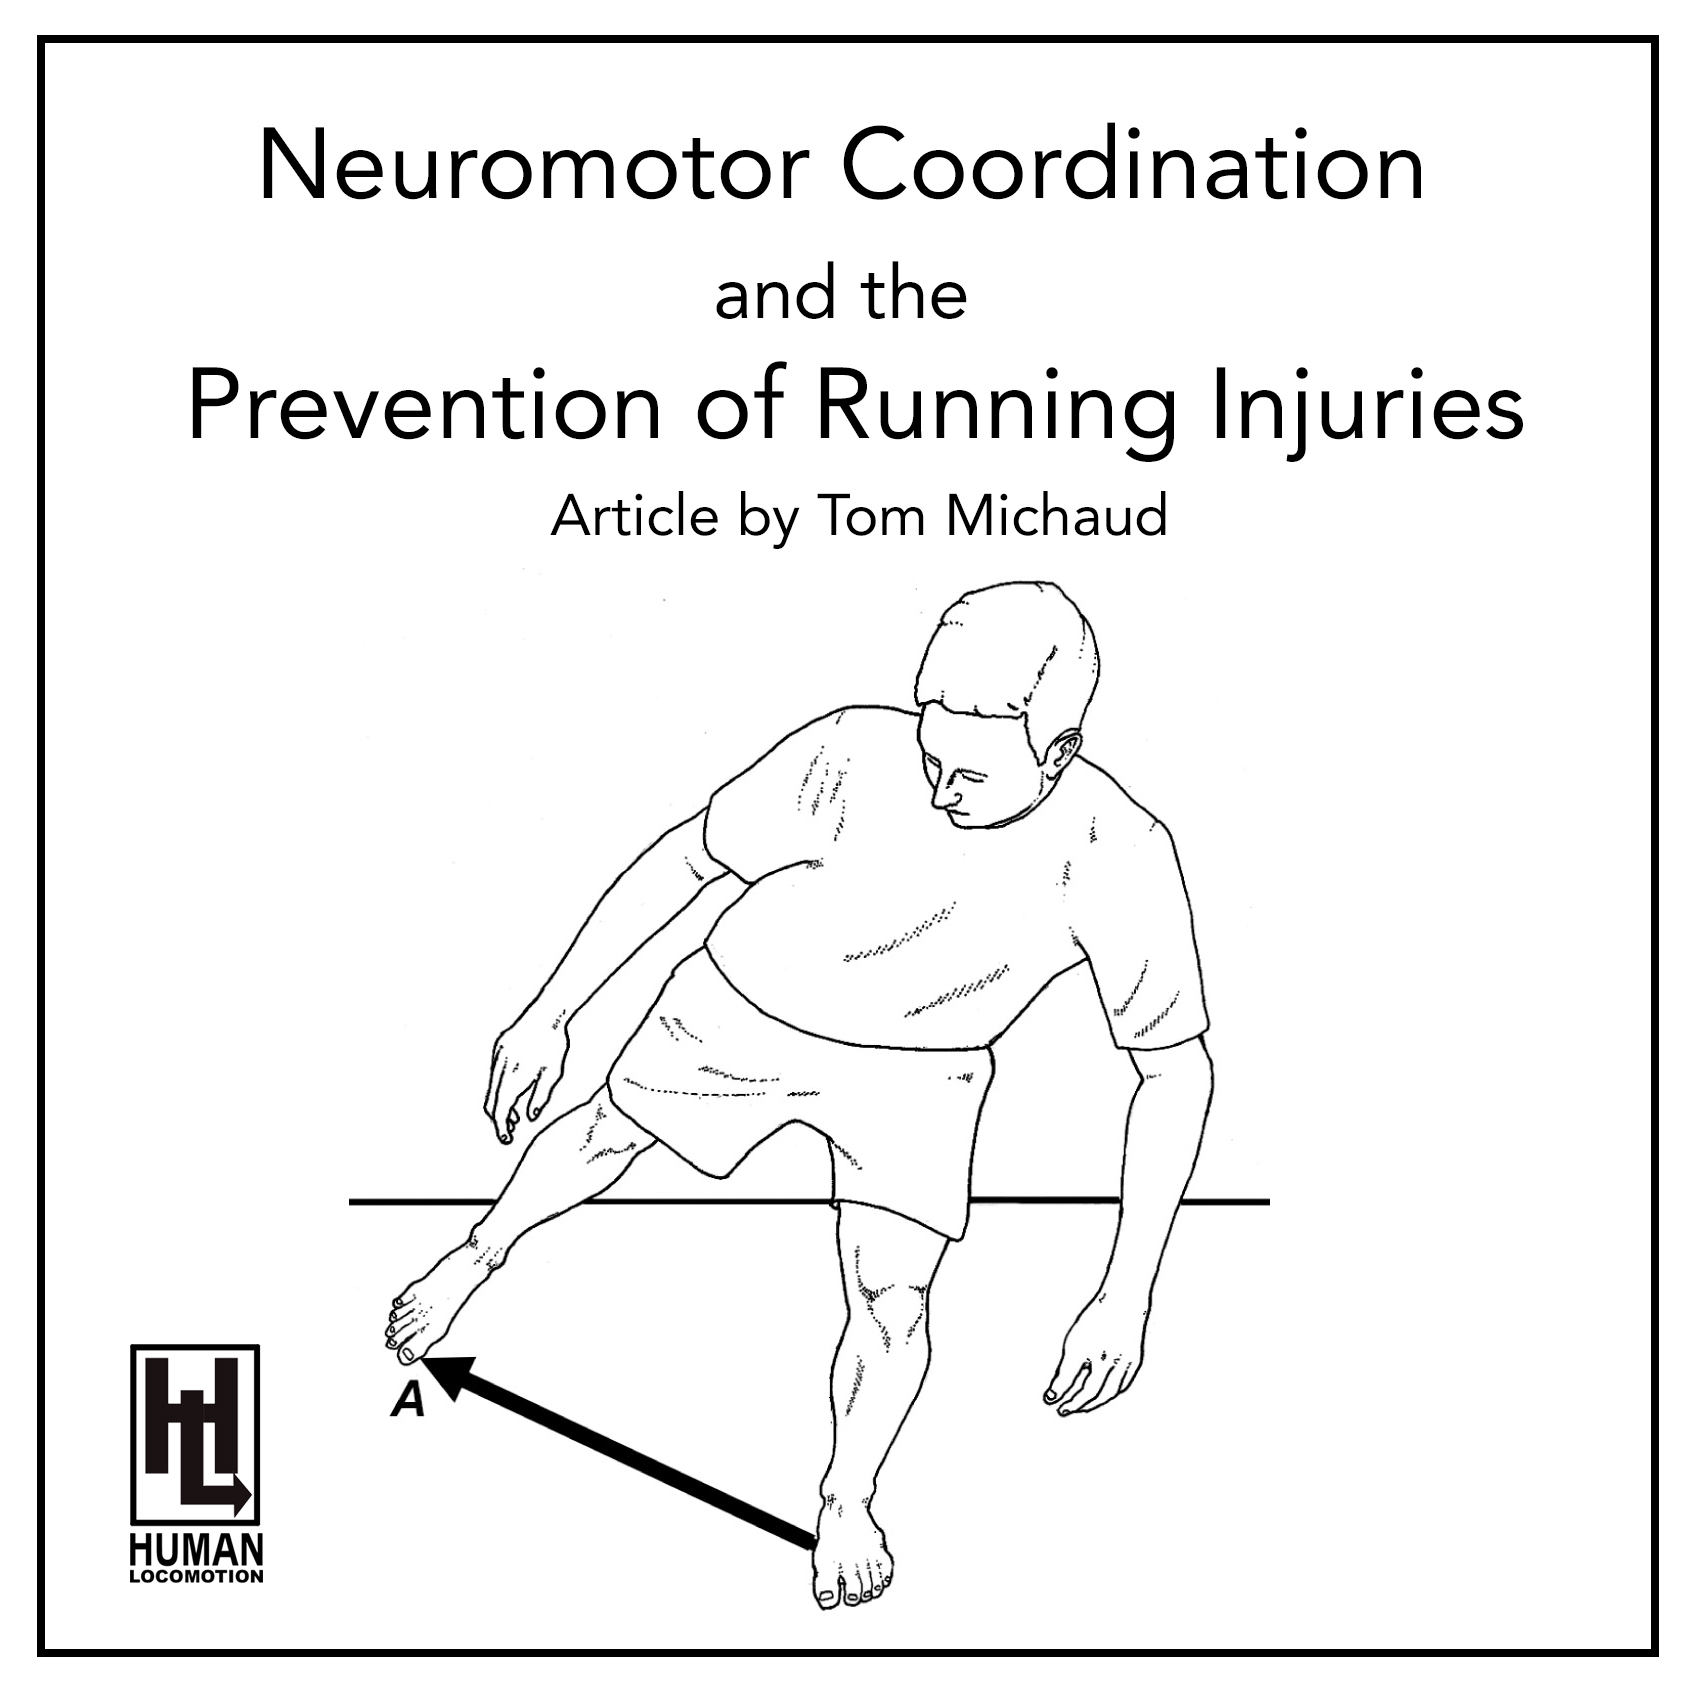 Neuromotor Coordination and the Prevention of Running Injuries